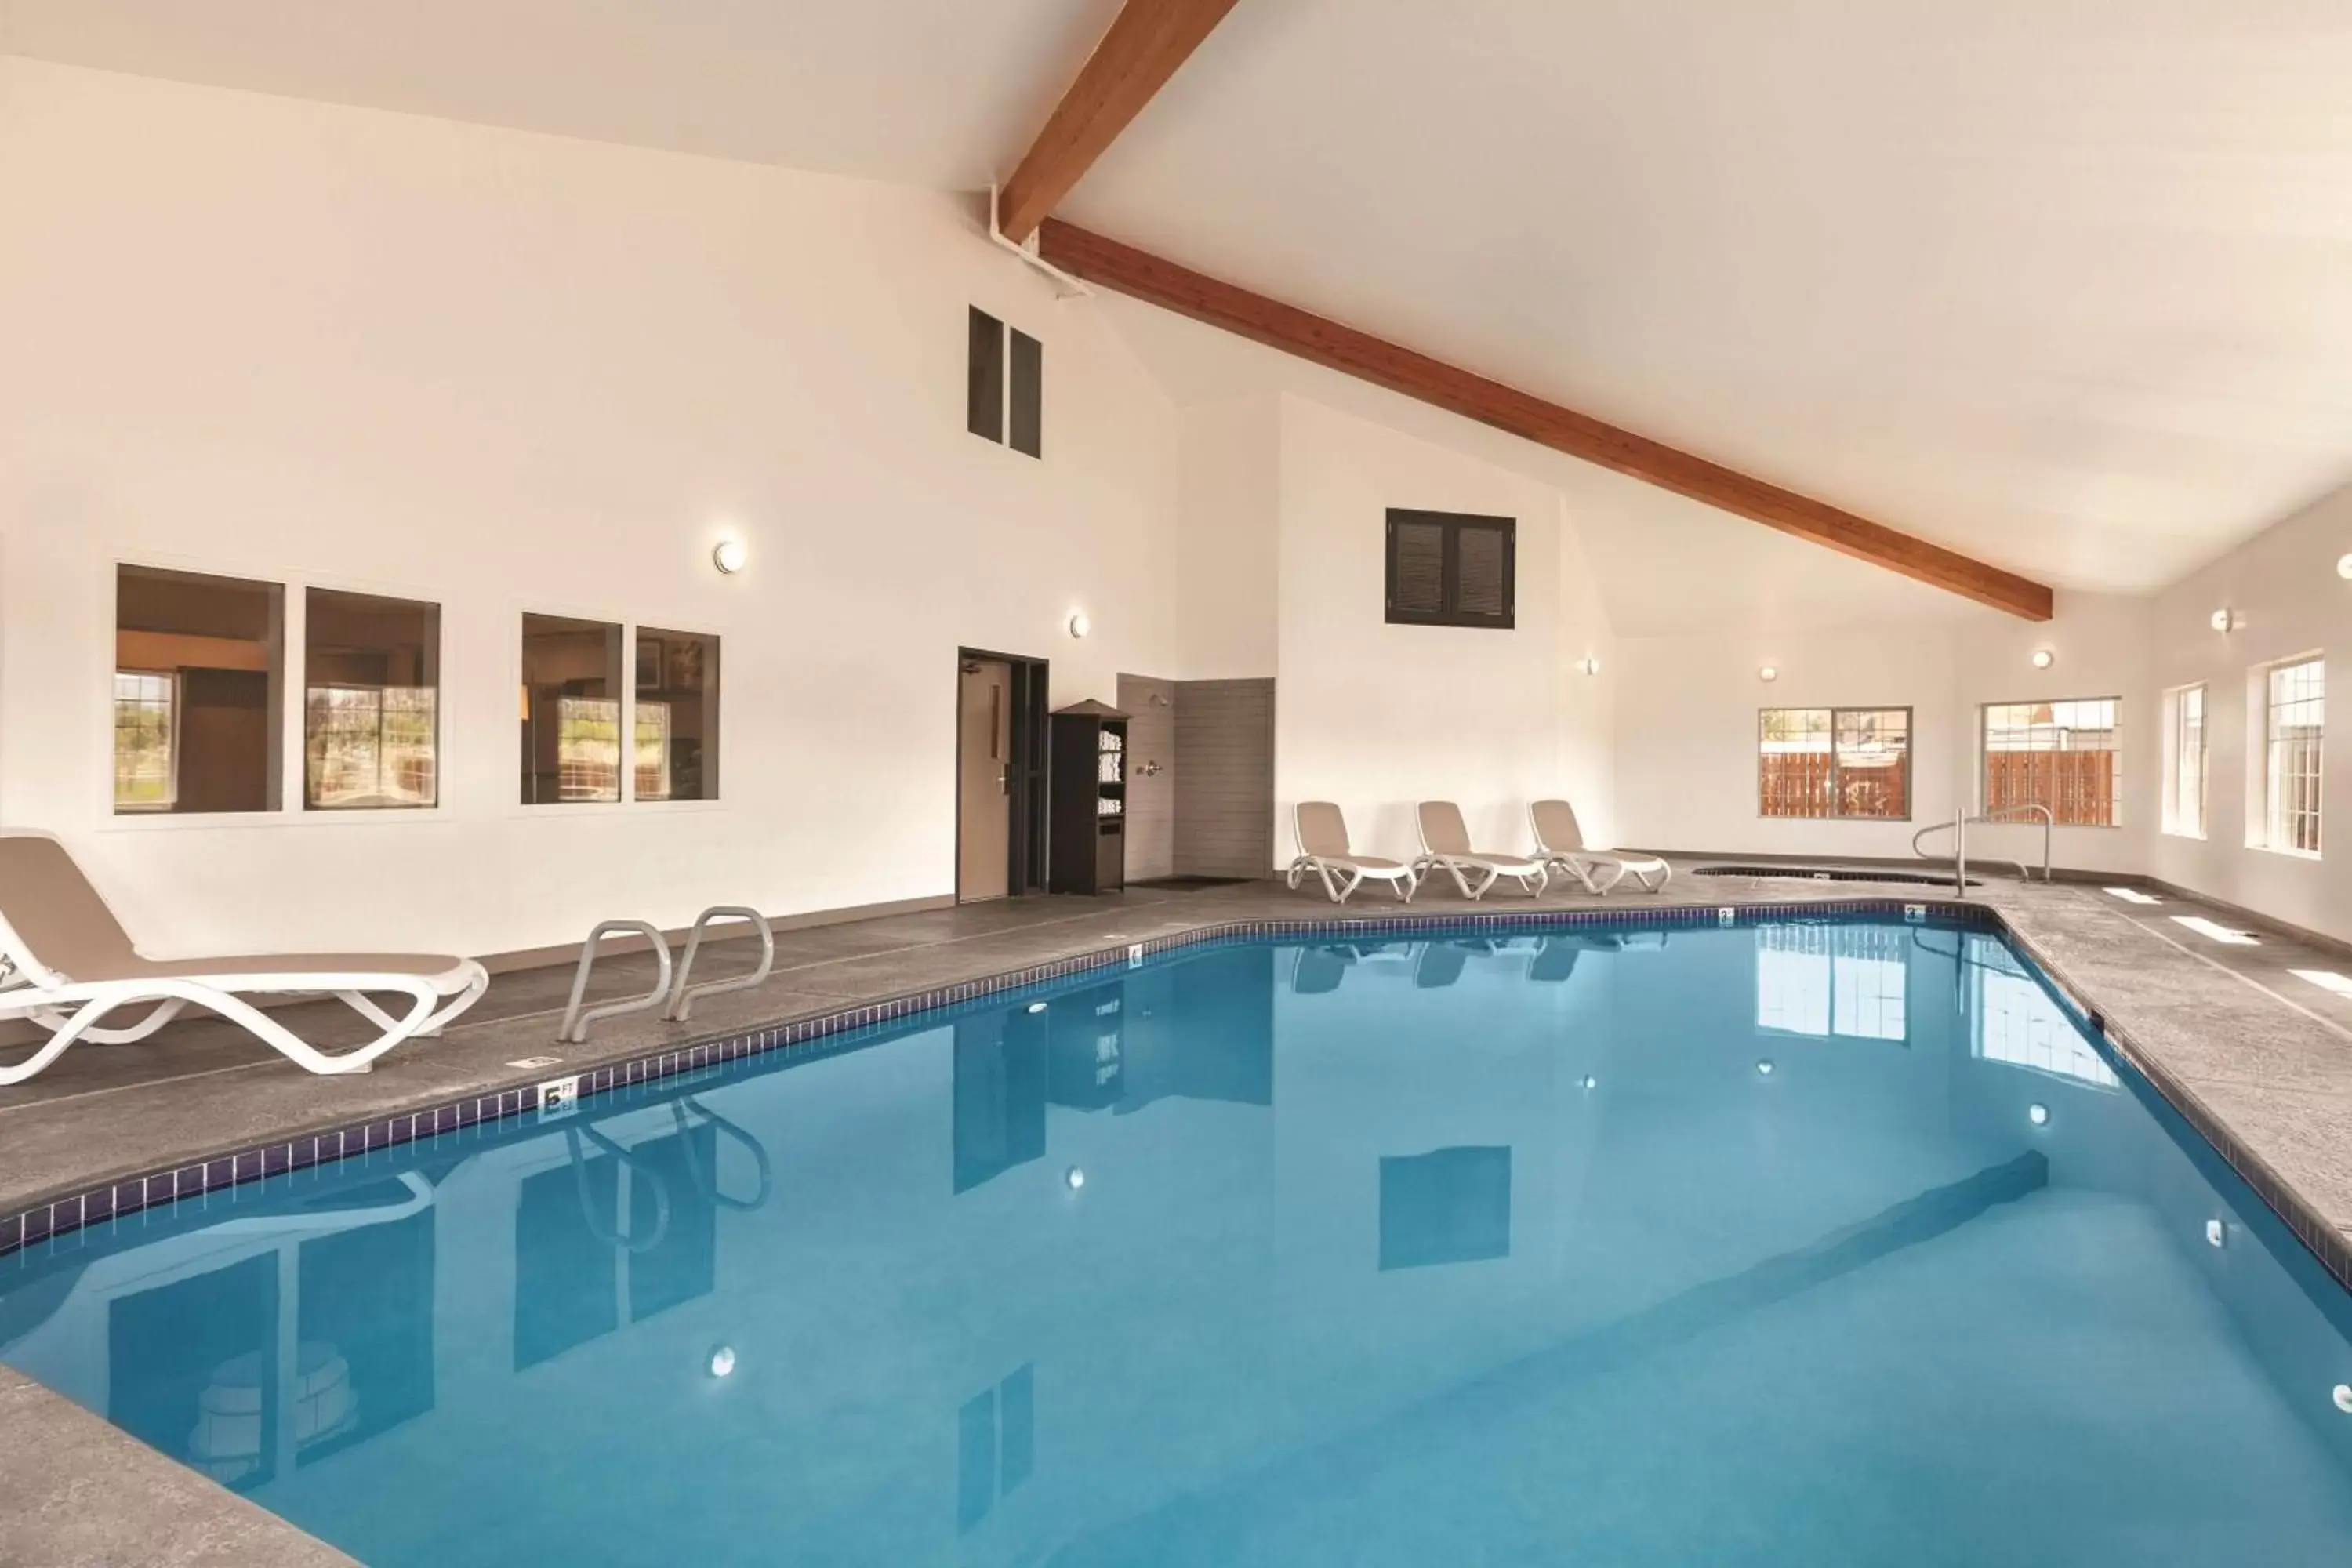 On site, Swimming Pool in Country Inn & Suites by Radisson, Prineville, OR